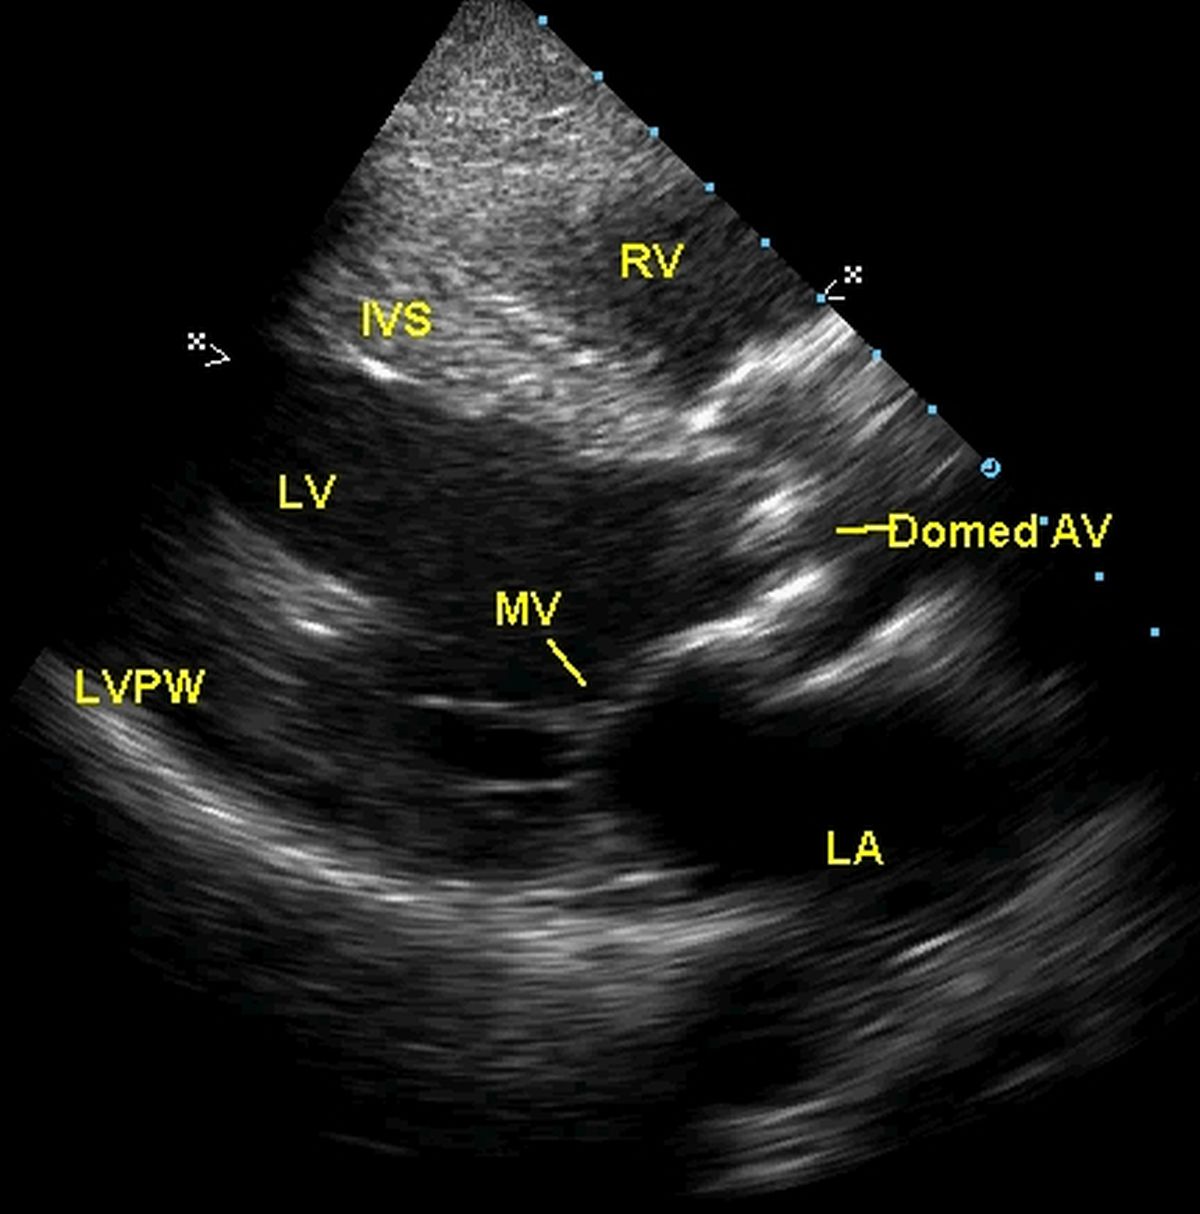 Echocardiogram from the left parasternal region showing thickened and doming aortic valve in severe aortic stenosis 